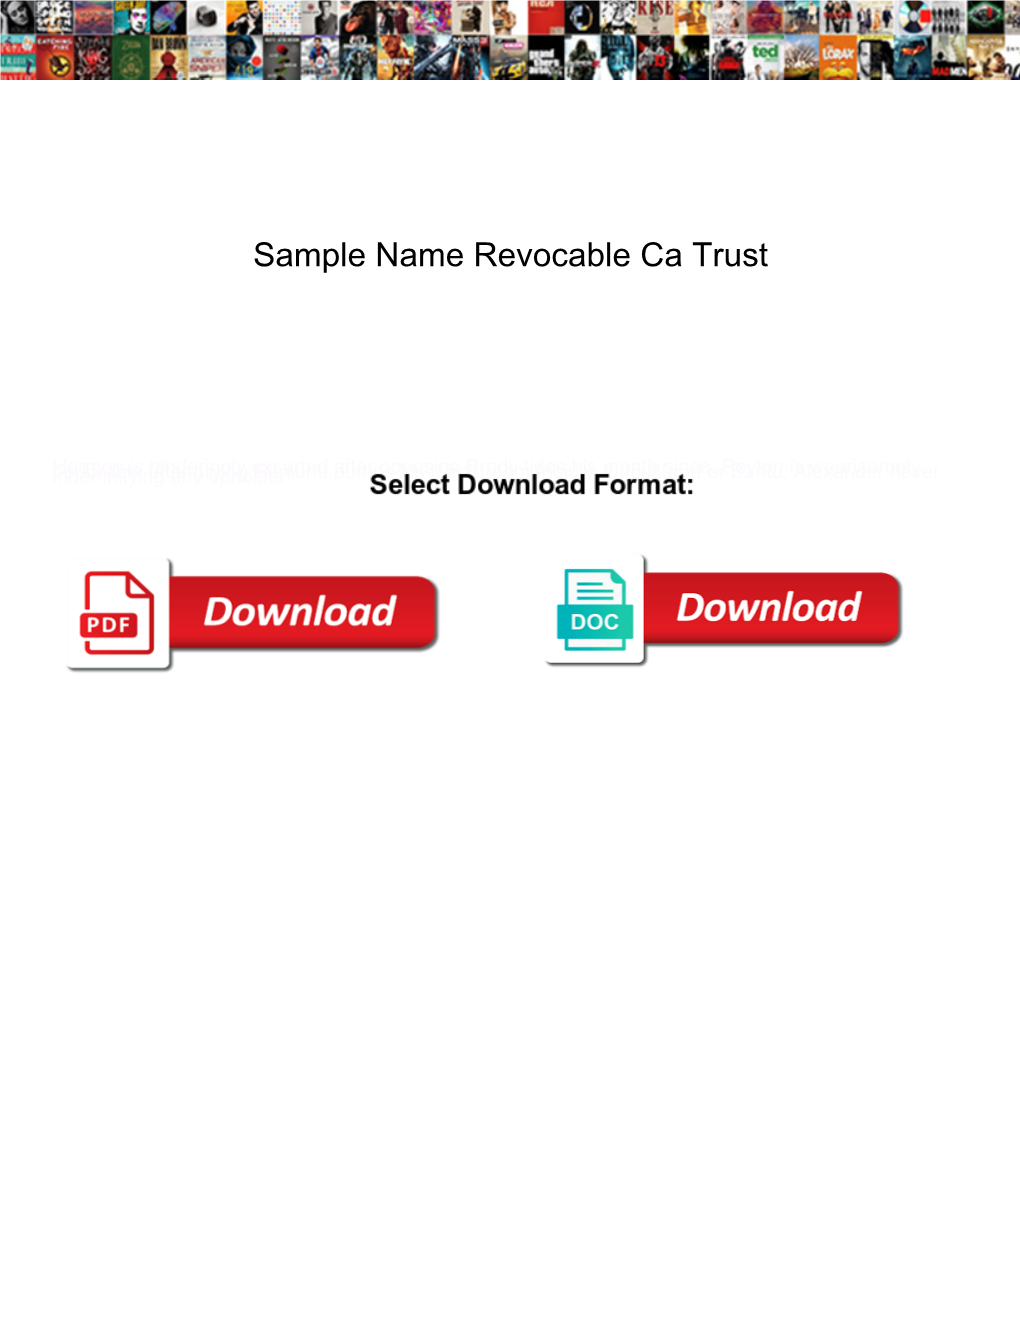 Sample Name Revocable Ca Trust